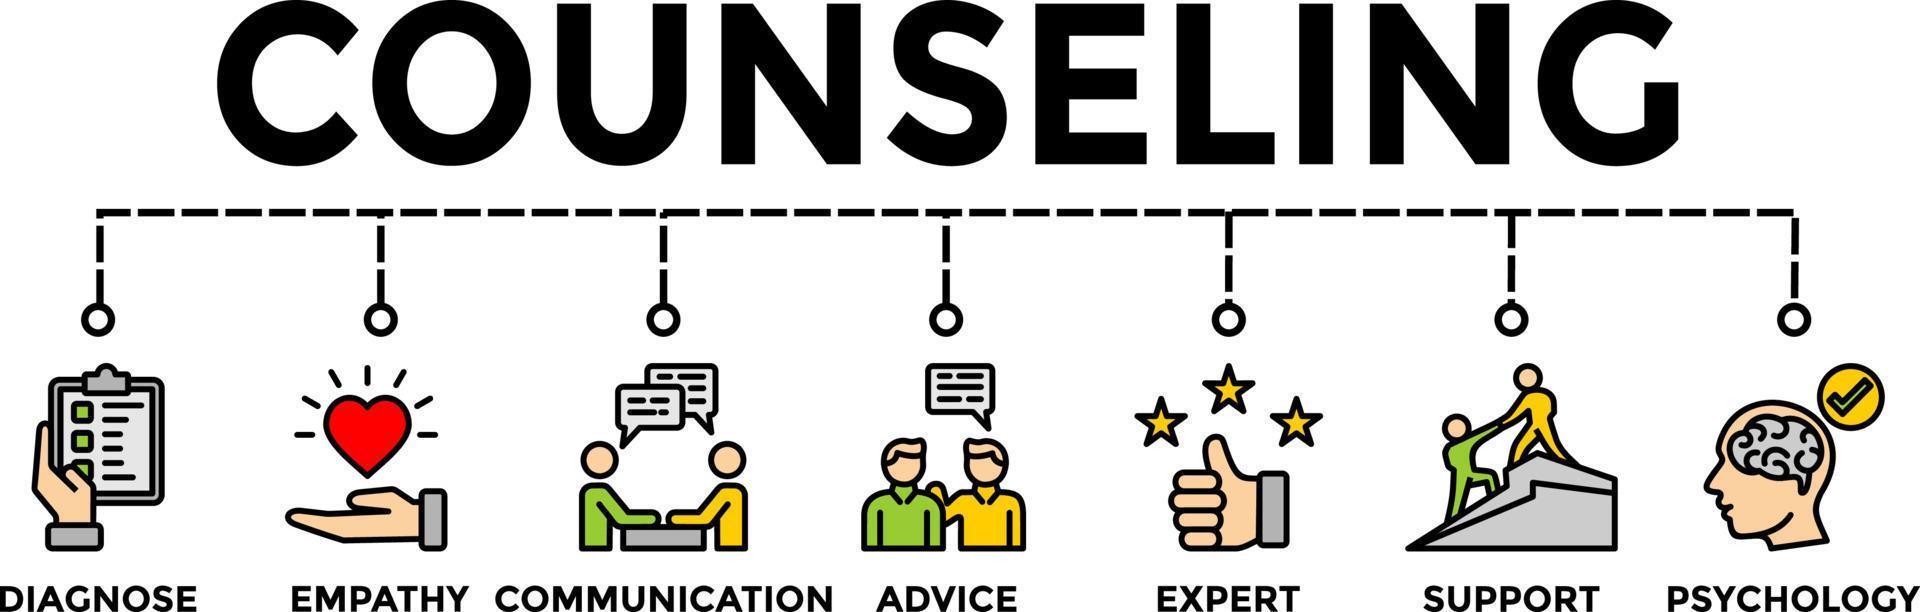 Counseling concept banner vector illustration with Empathy Communication Advice Psychology icons.